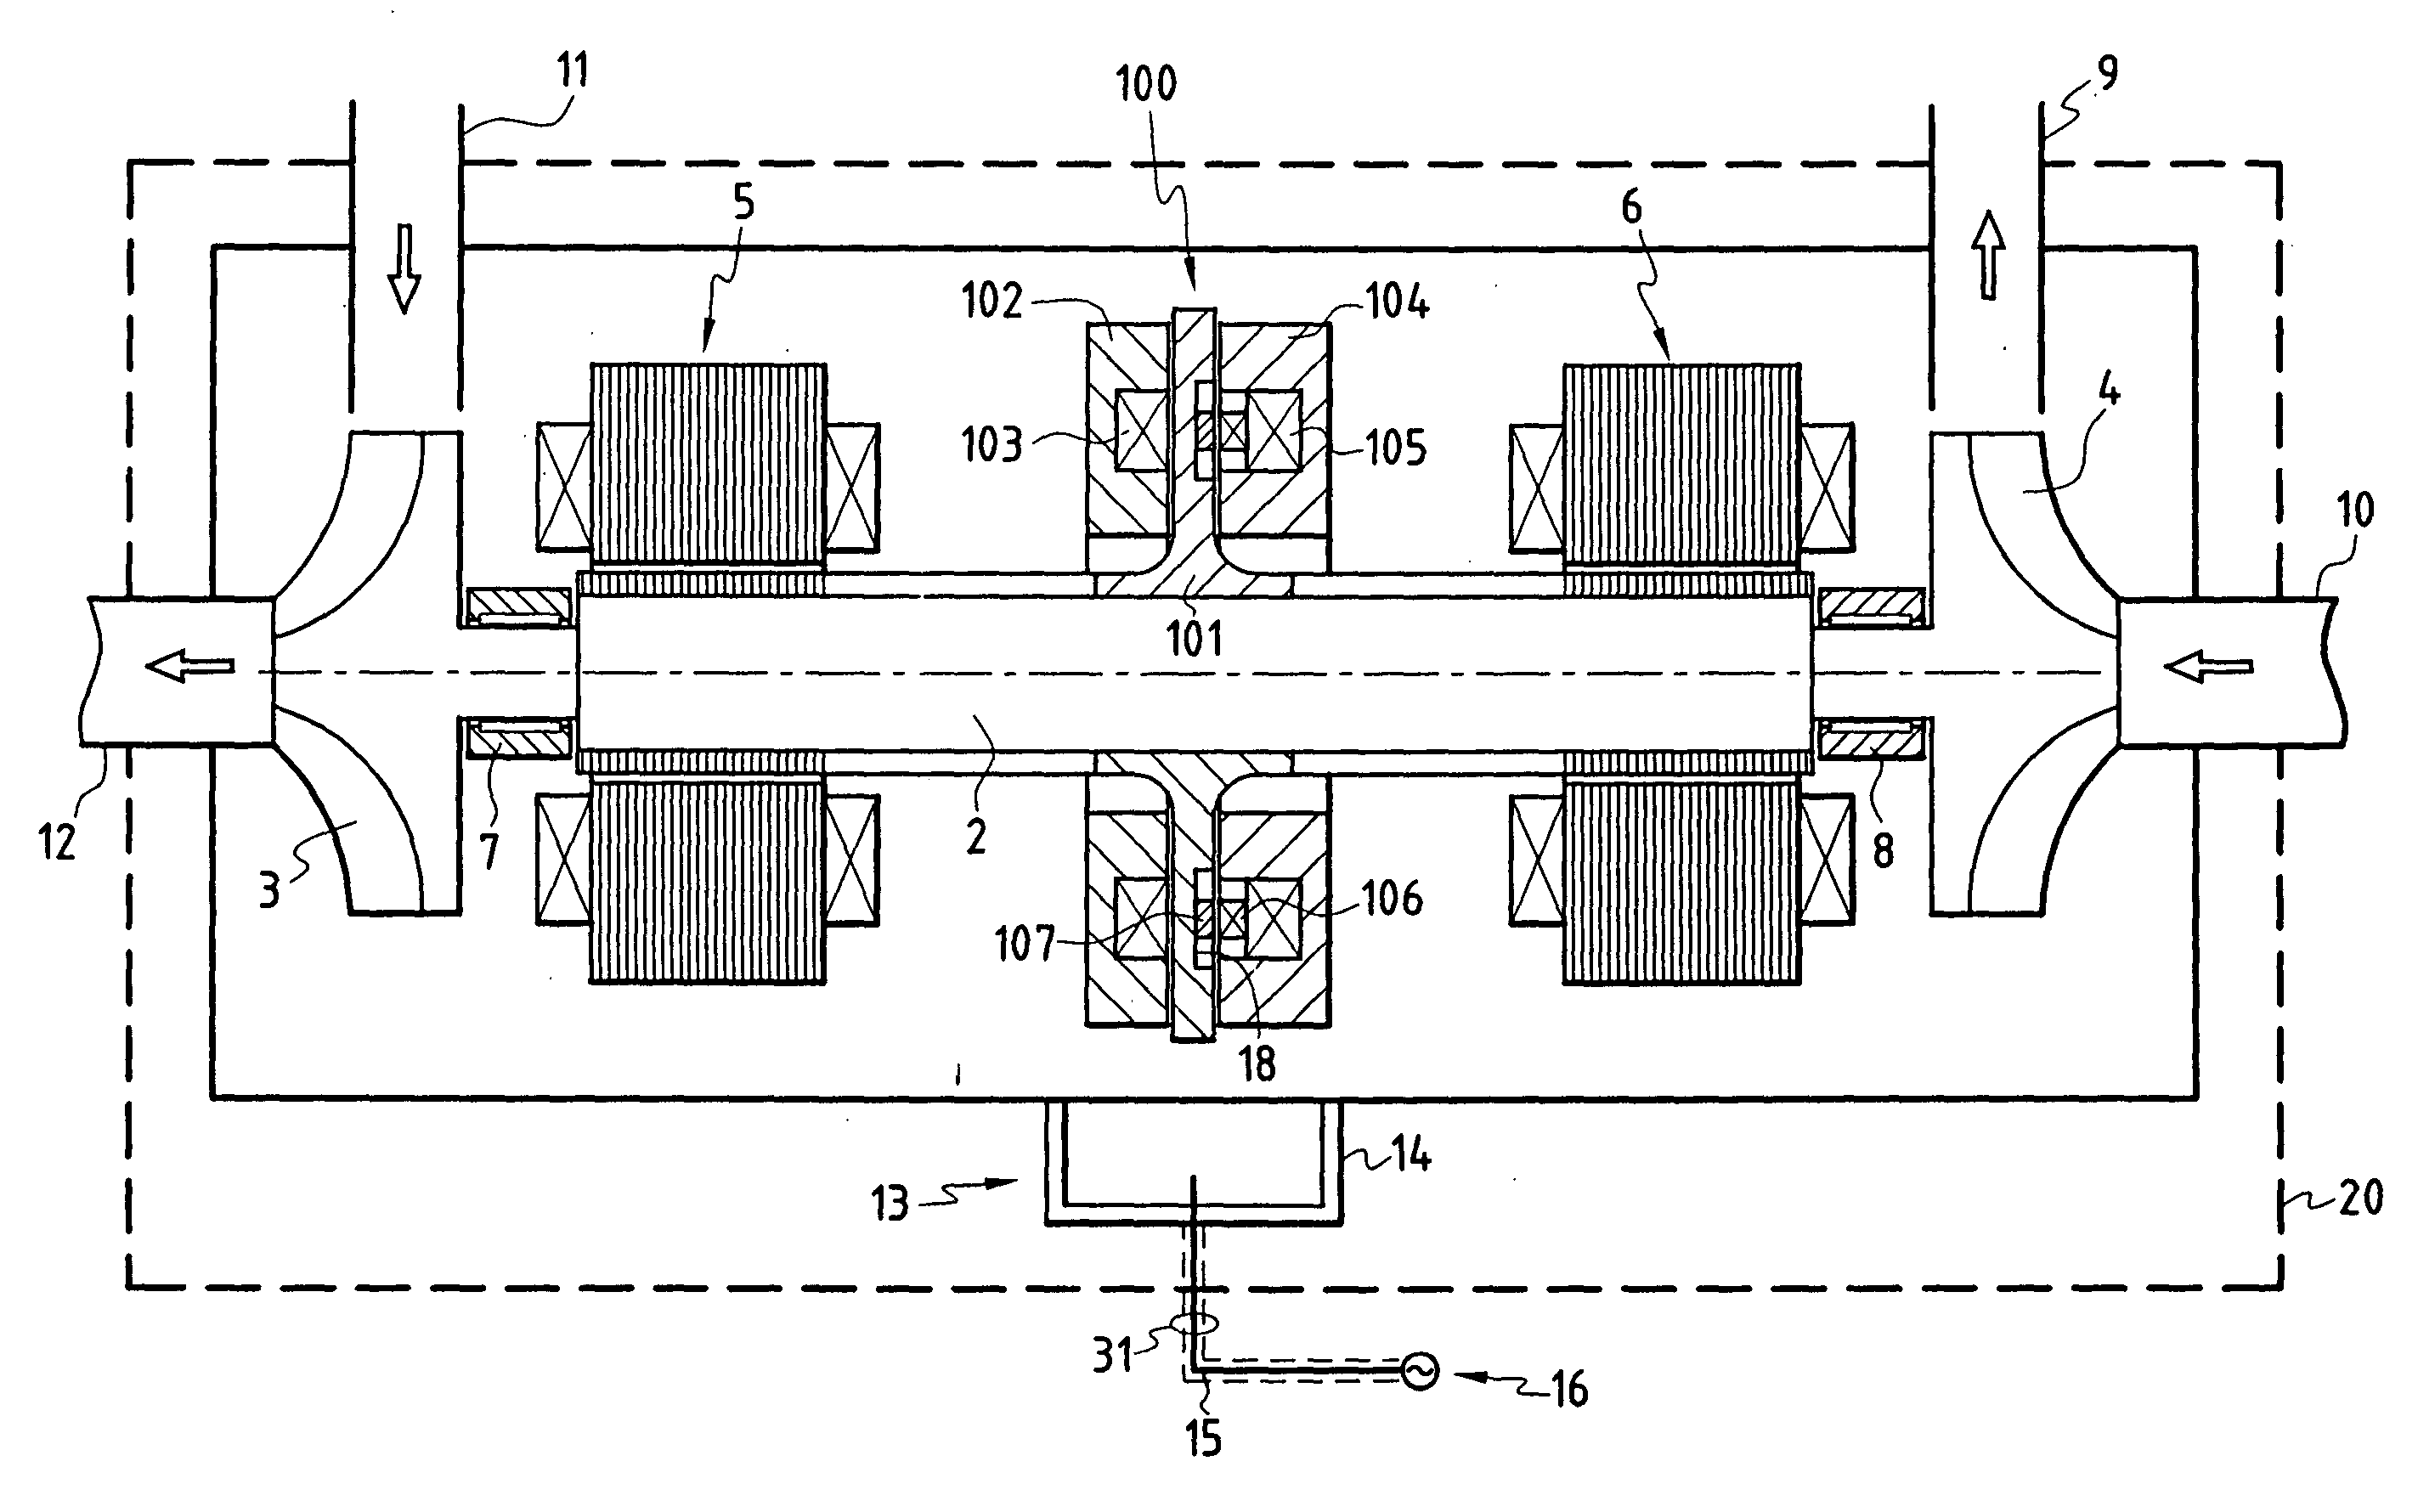 Rotary machine with axial stop incorporating a current generator